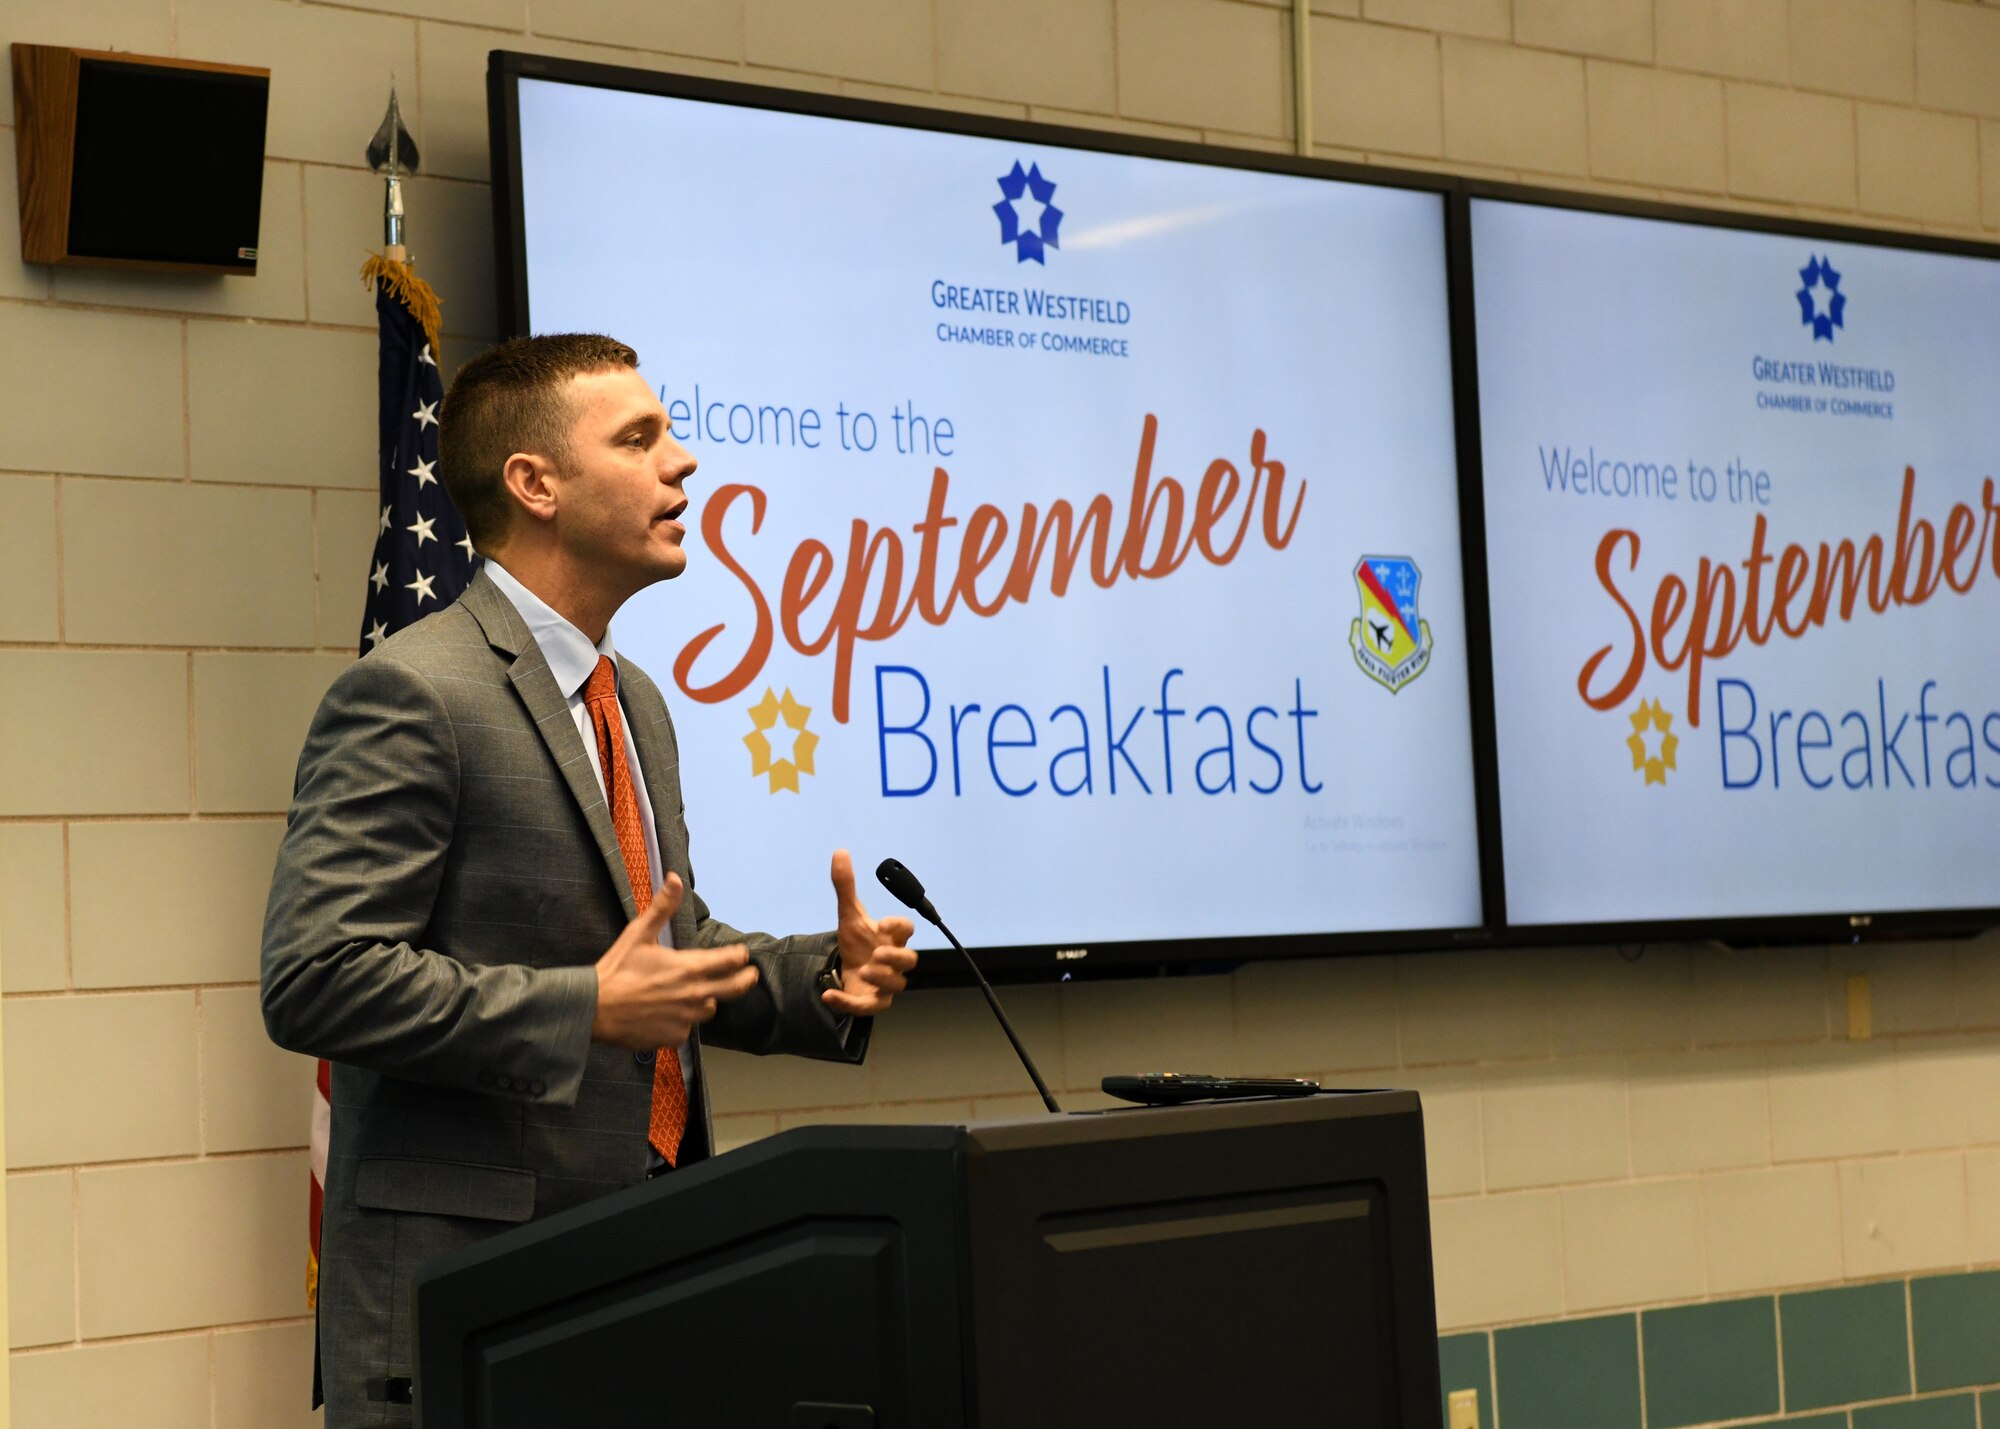 The 104th Fighter Wing hosts the September breakfast for the Greater Westfield Chamber of Commerce. John Velis, member of the Massachusetts house of Representatives spoke to the chamber and discussed upcoming bills. (U.S. Air National Guard photo by Airman Basic Camille Lienau)